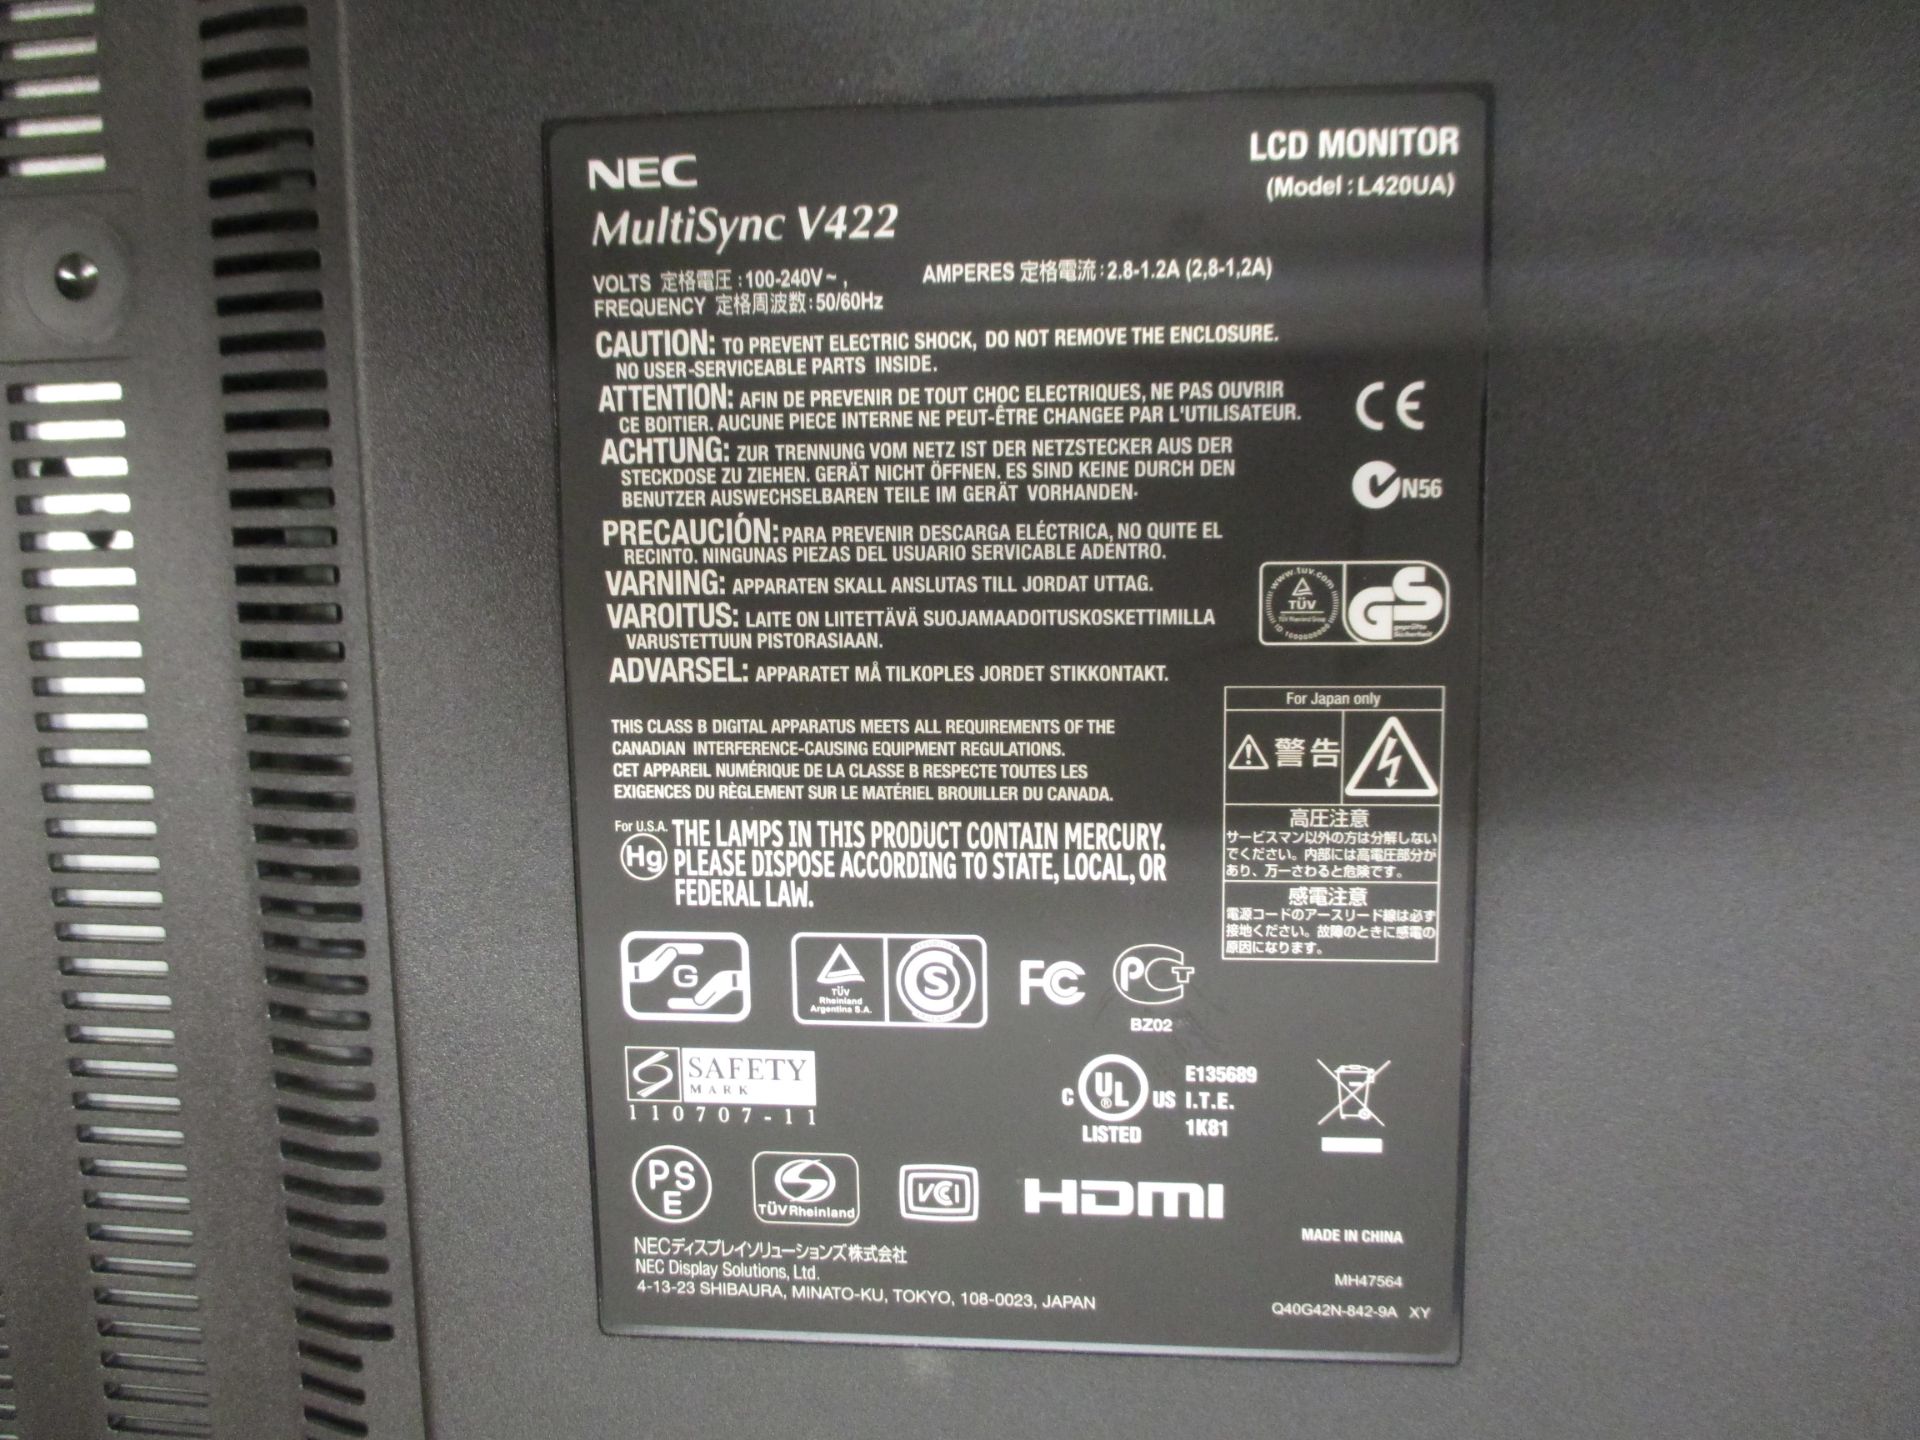 NEC 42" LCD MONITOR WITH SPEAKERS ATTACHED & HDMI. MULTISYNC V422. MODEL L420UA. - Image 3 of 5